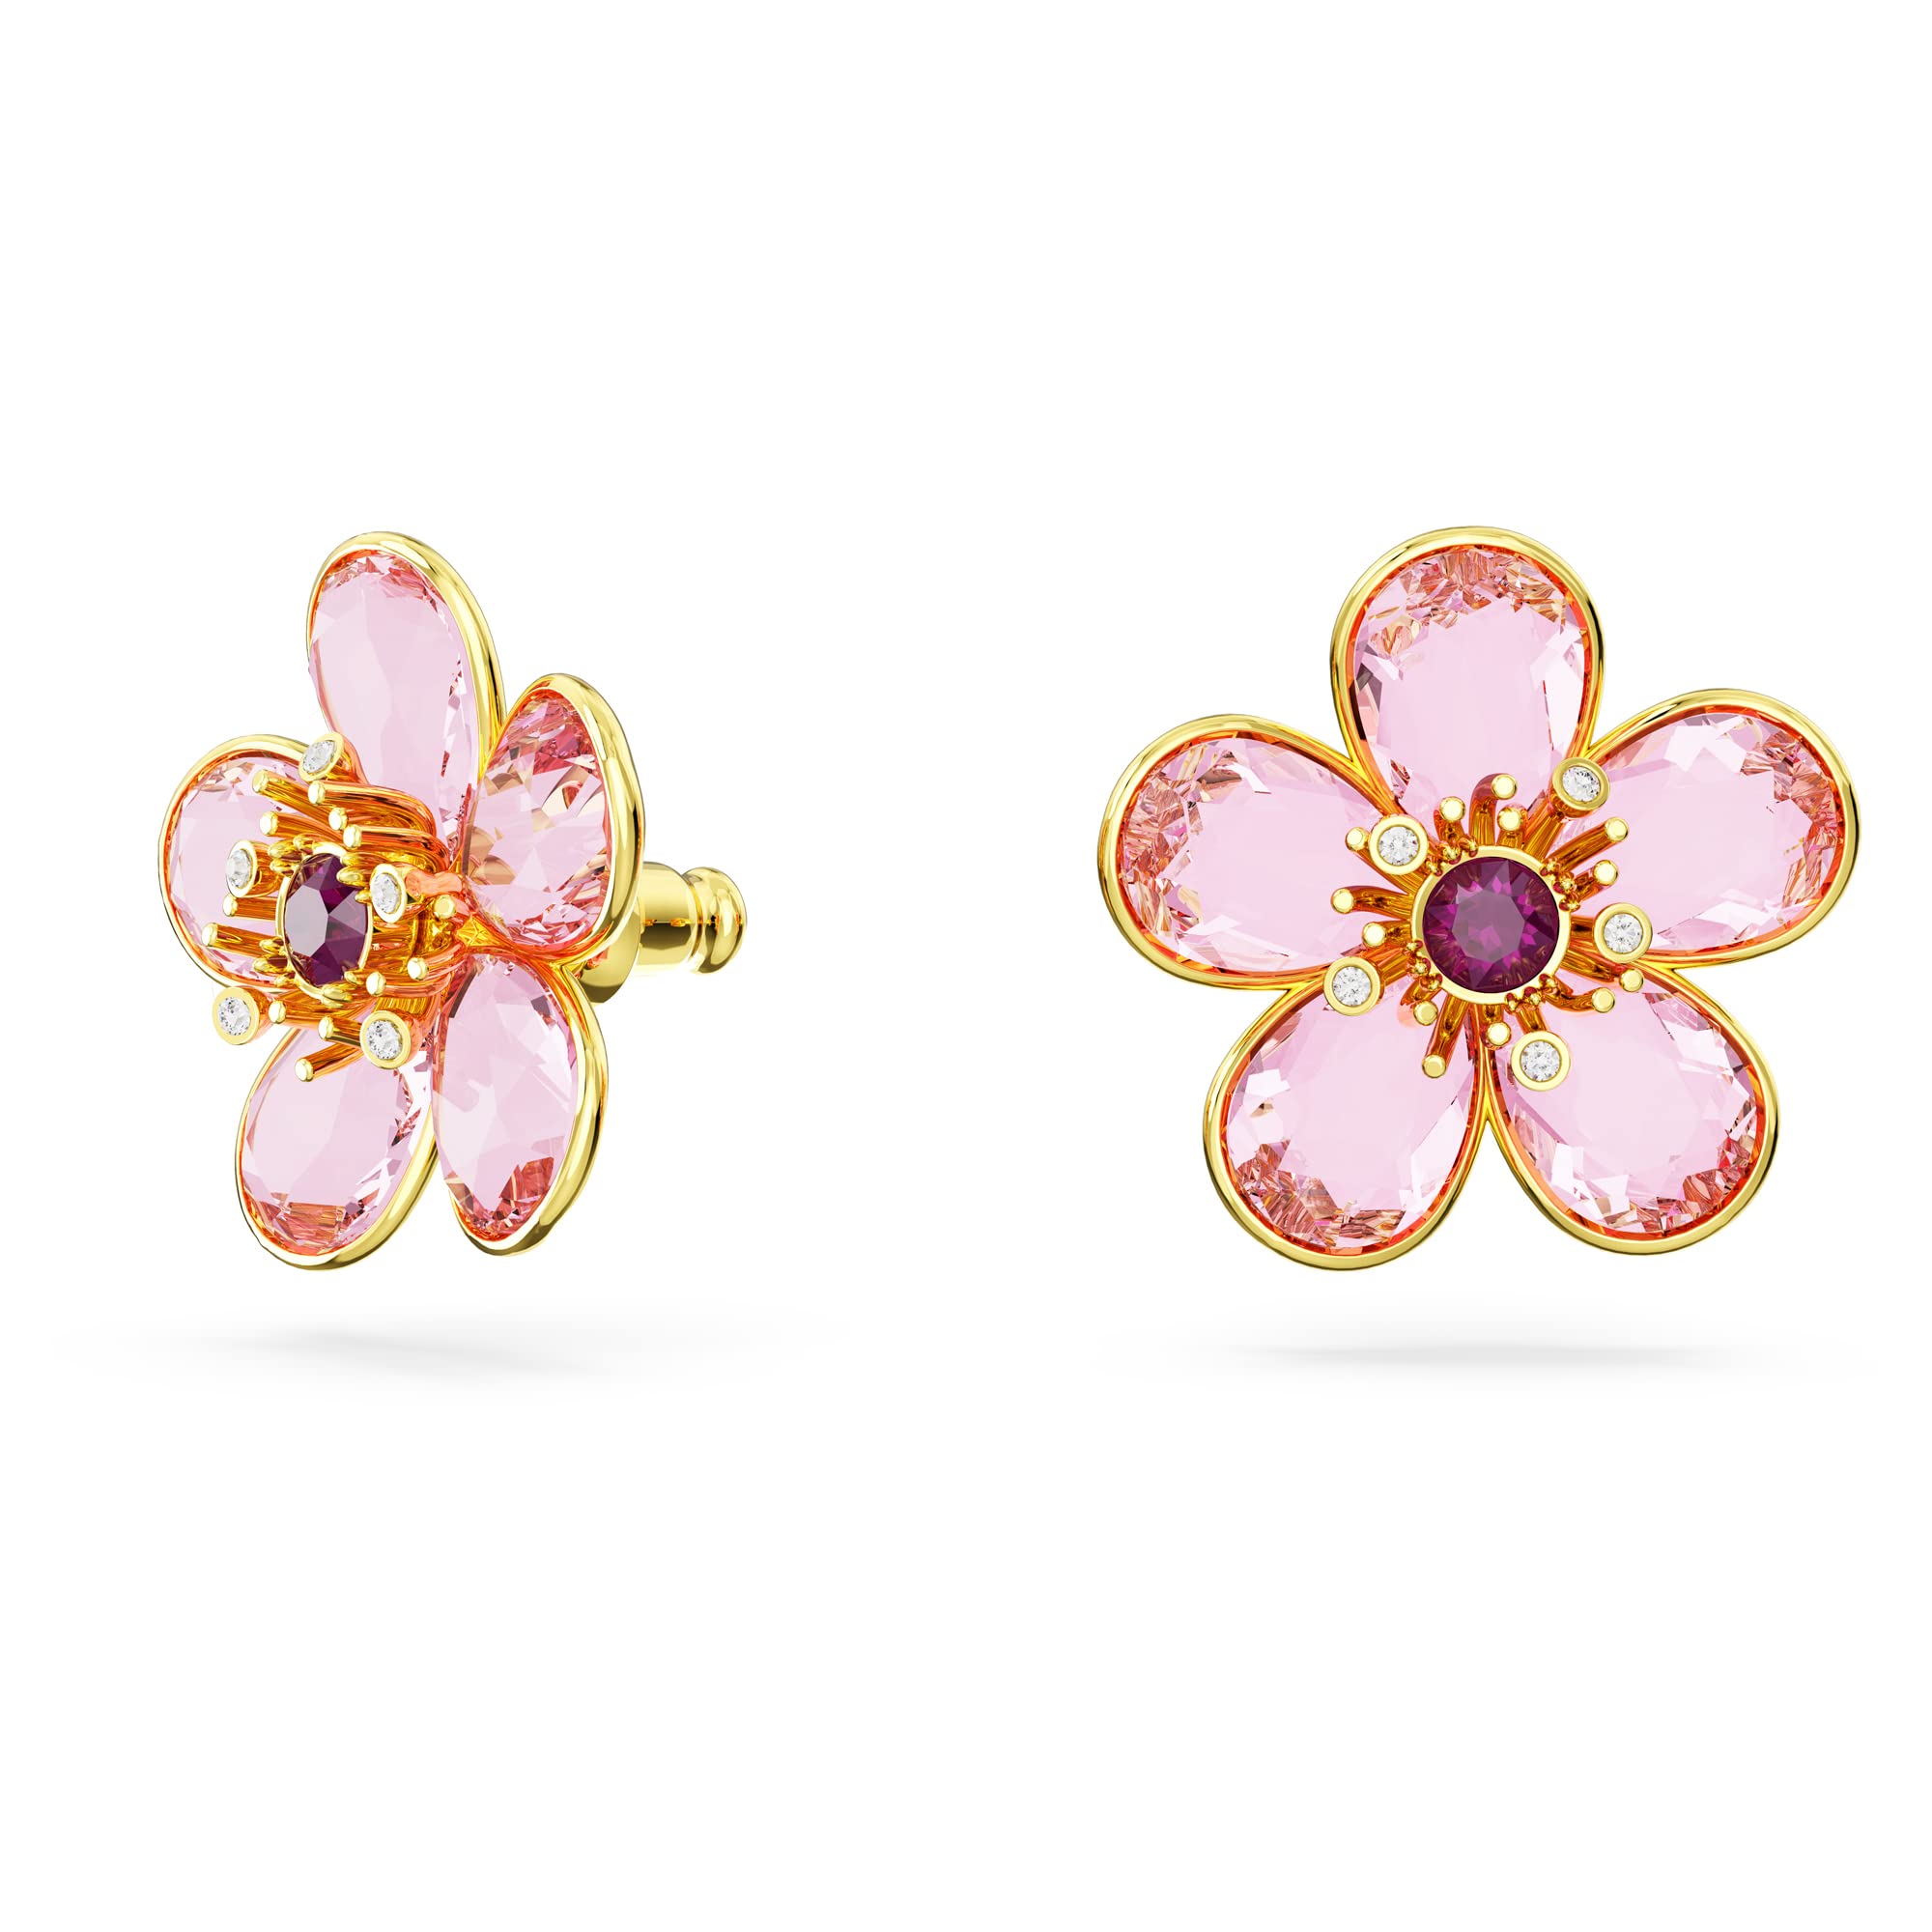 Swarovski Florere Pierced Stud Earrings with Yellow Crystals in Flower Motif on Gold-Tone Finish, Part of the Swarovski Florere Collection